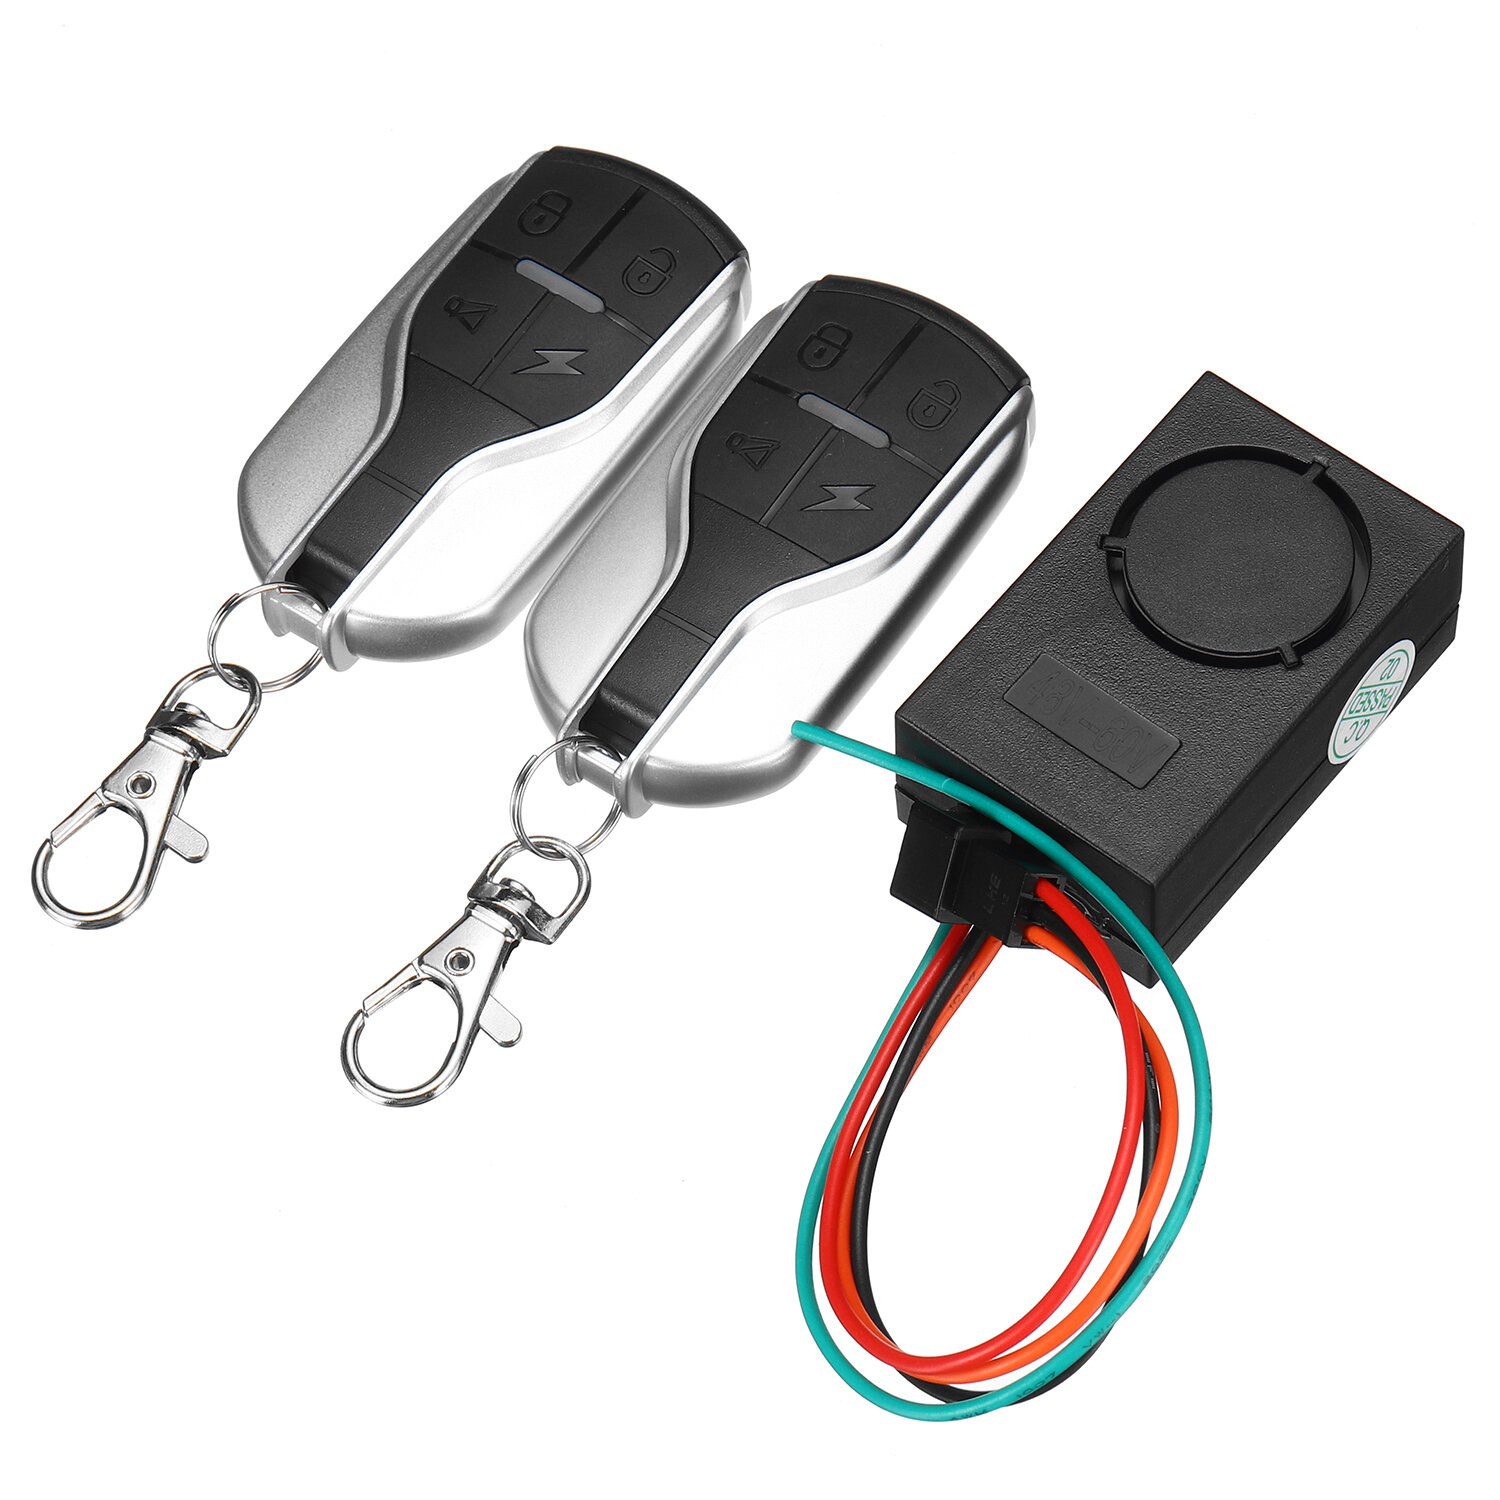 LAOTIE Anti-theft Device Remote Control For Electric Scooters Below 60V